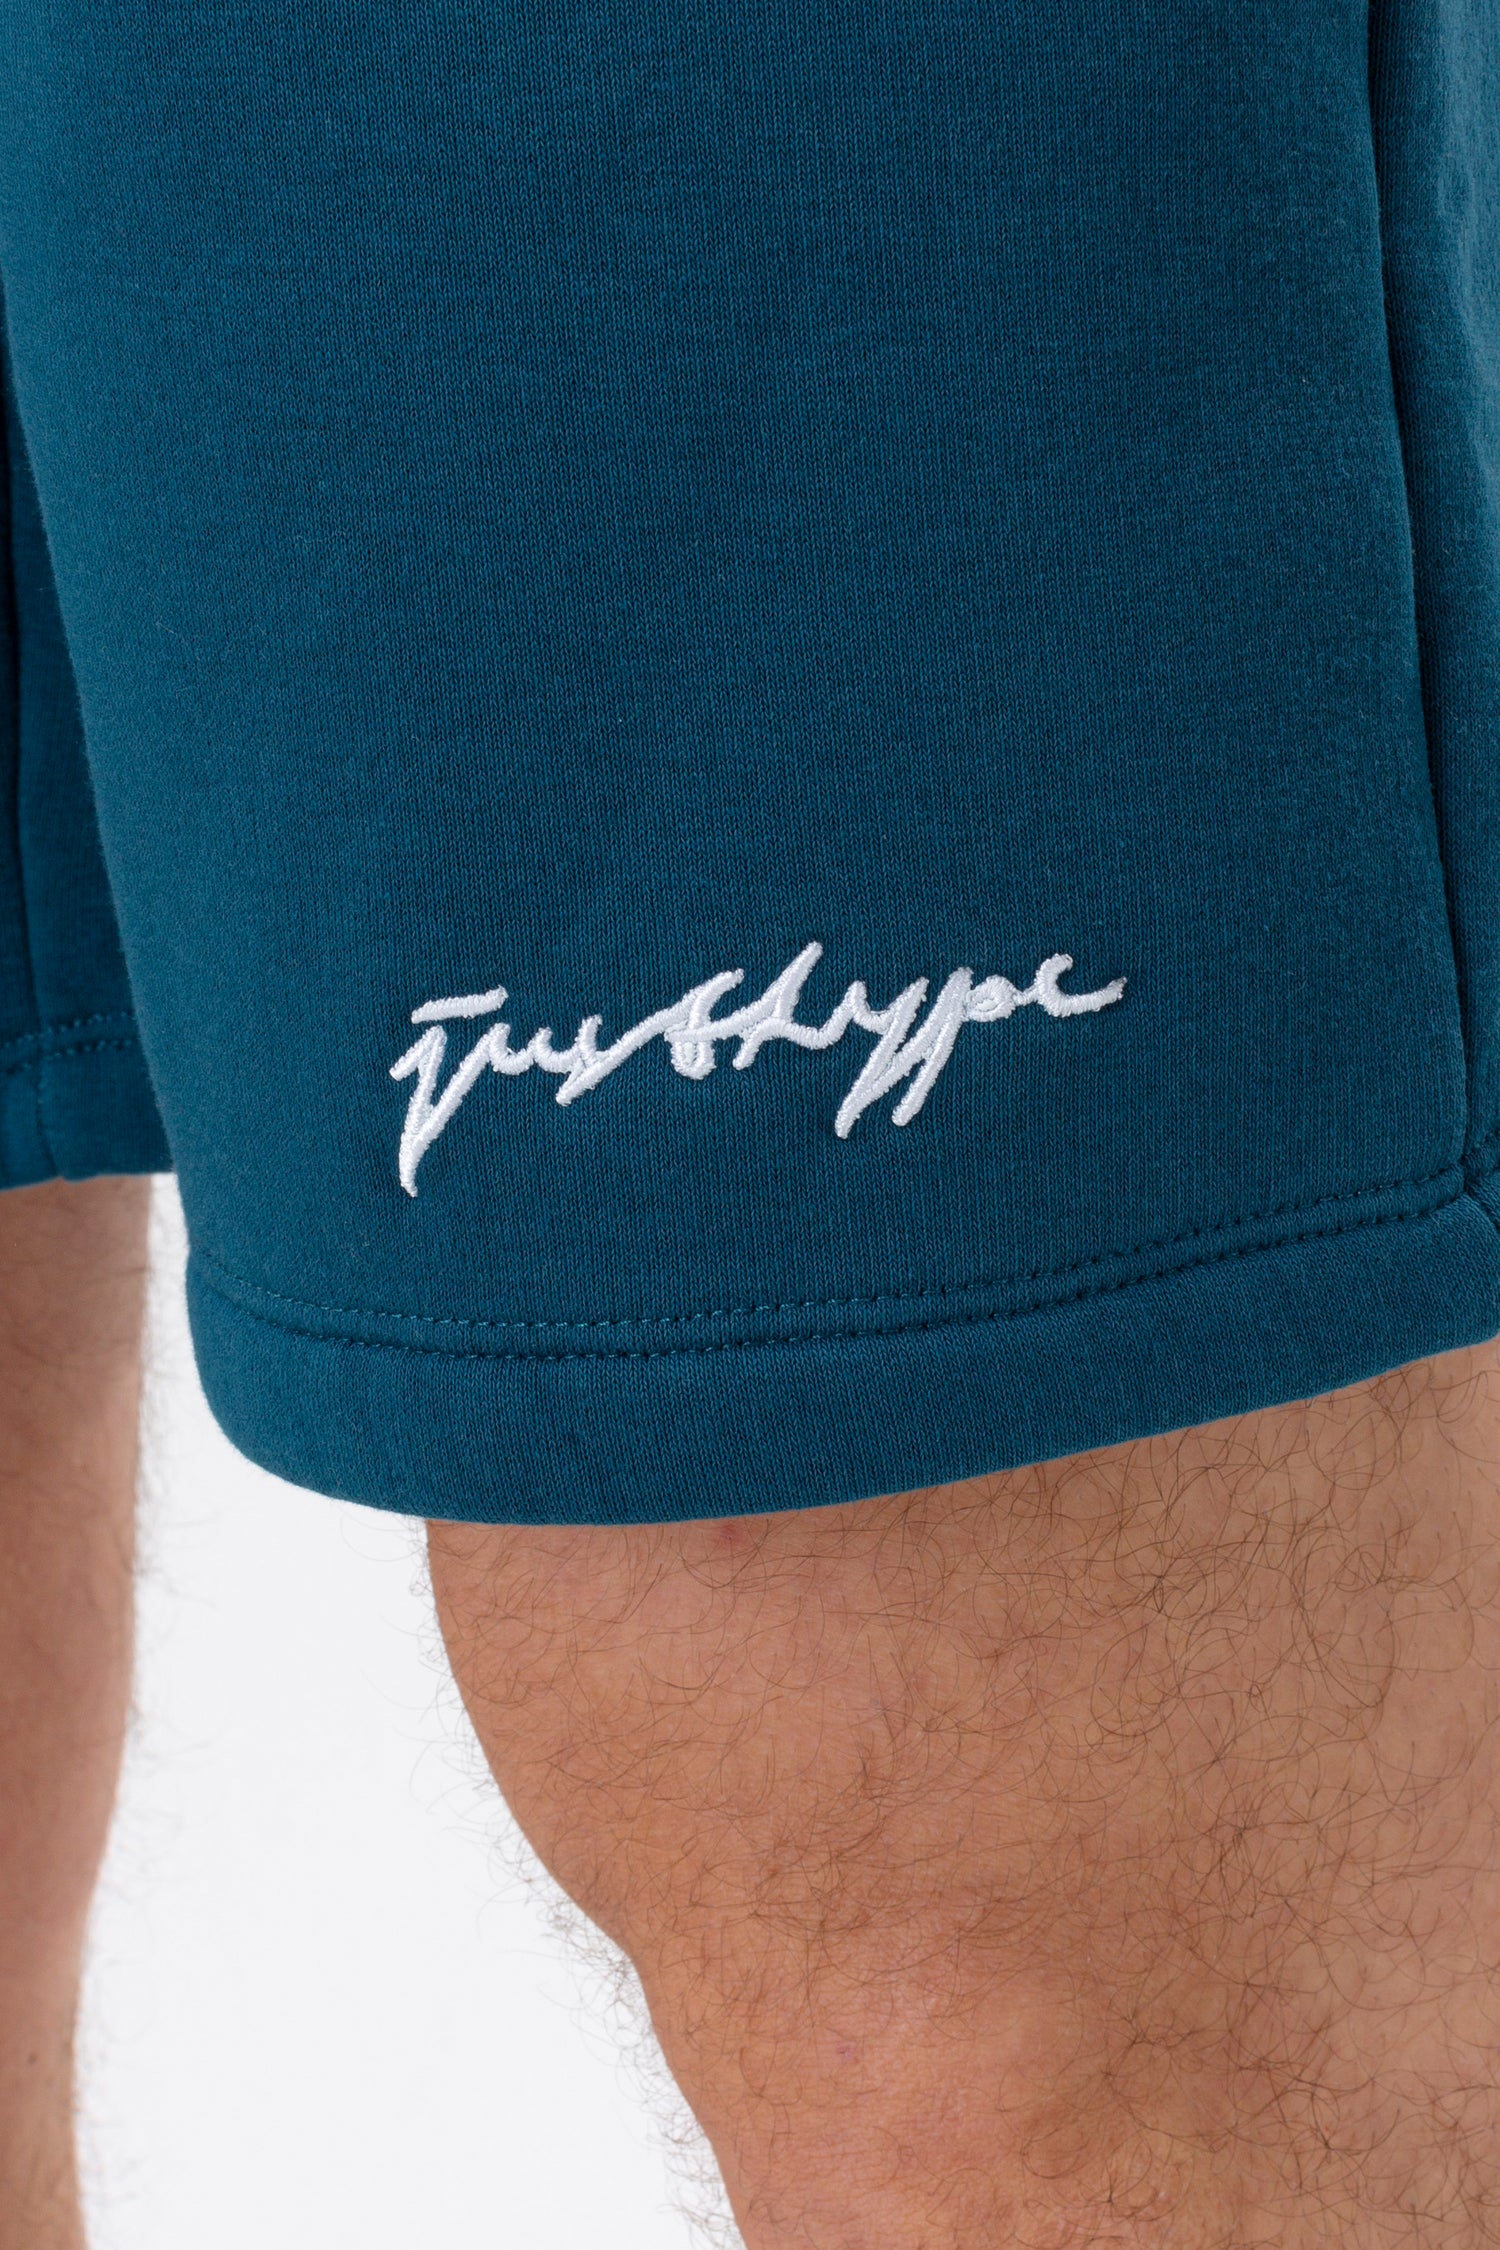 HYPE MENS TEAL FADE SCRIBBLE SHORTS